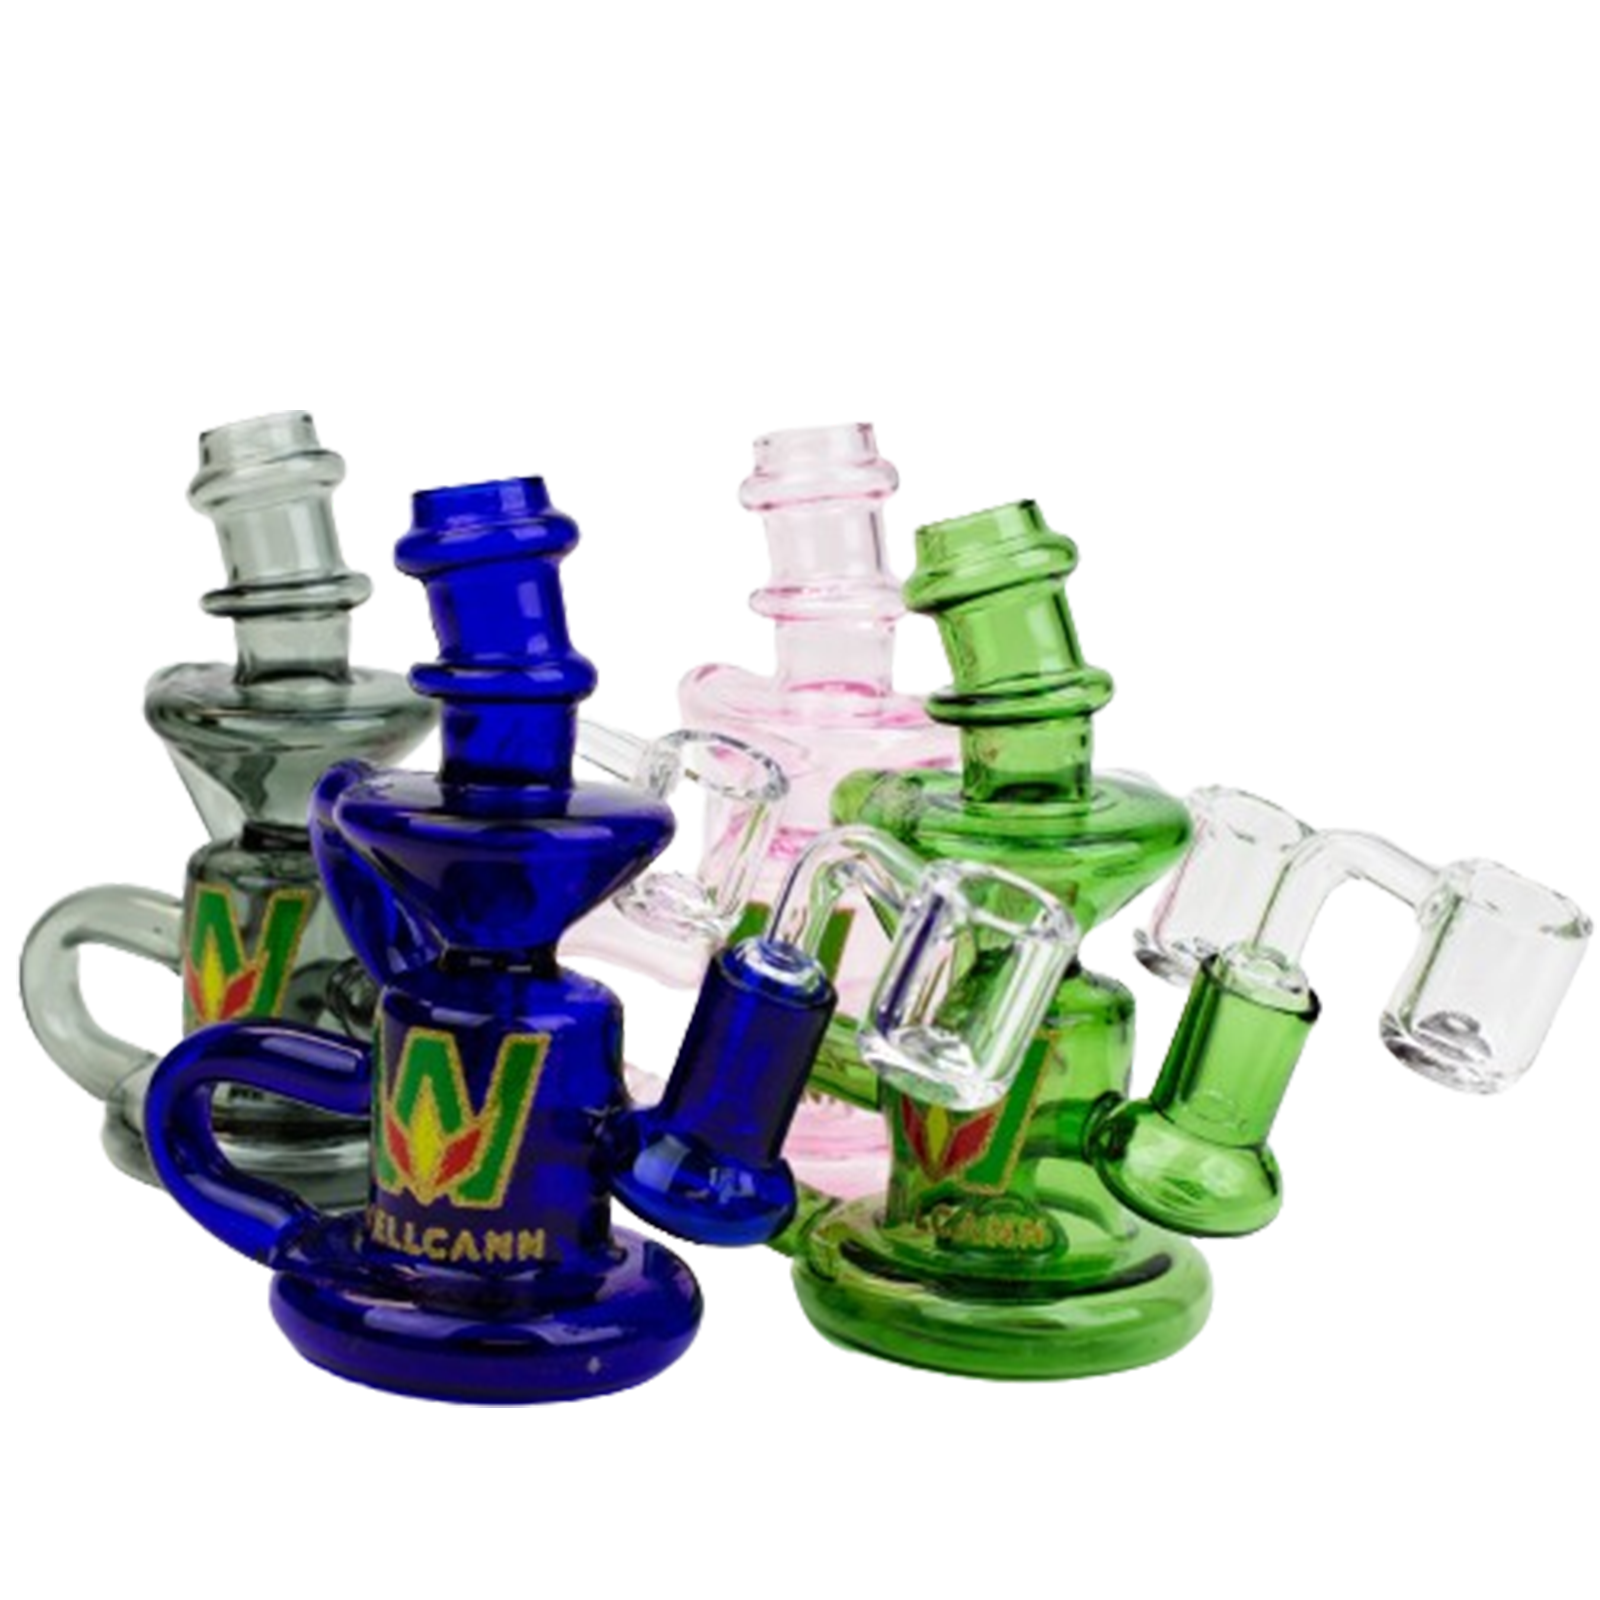 WellCann 6" Double Loop Recycler Rig with Banger